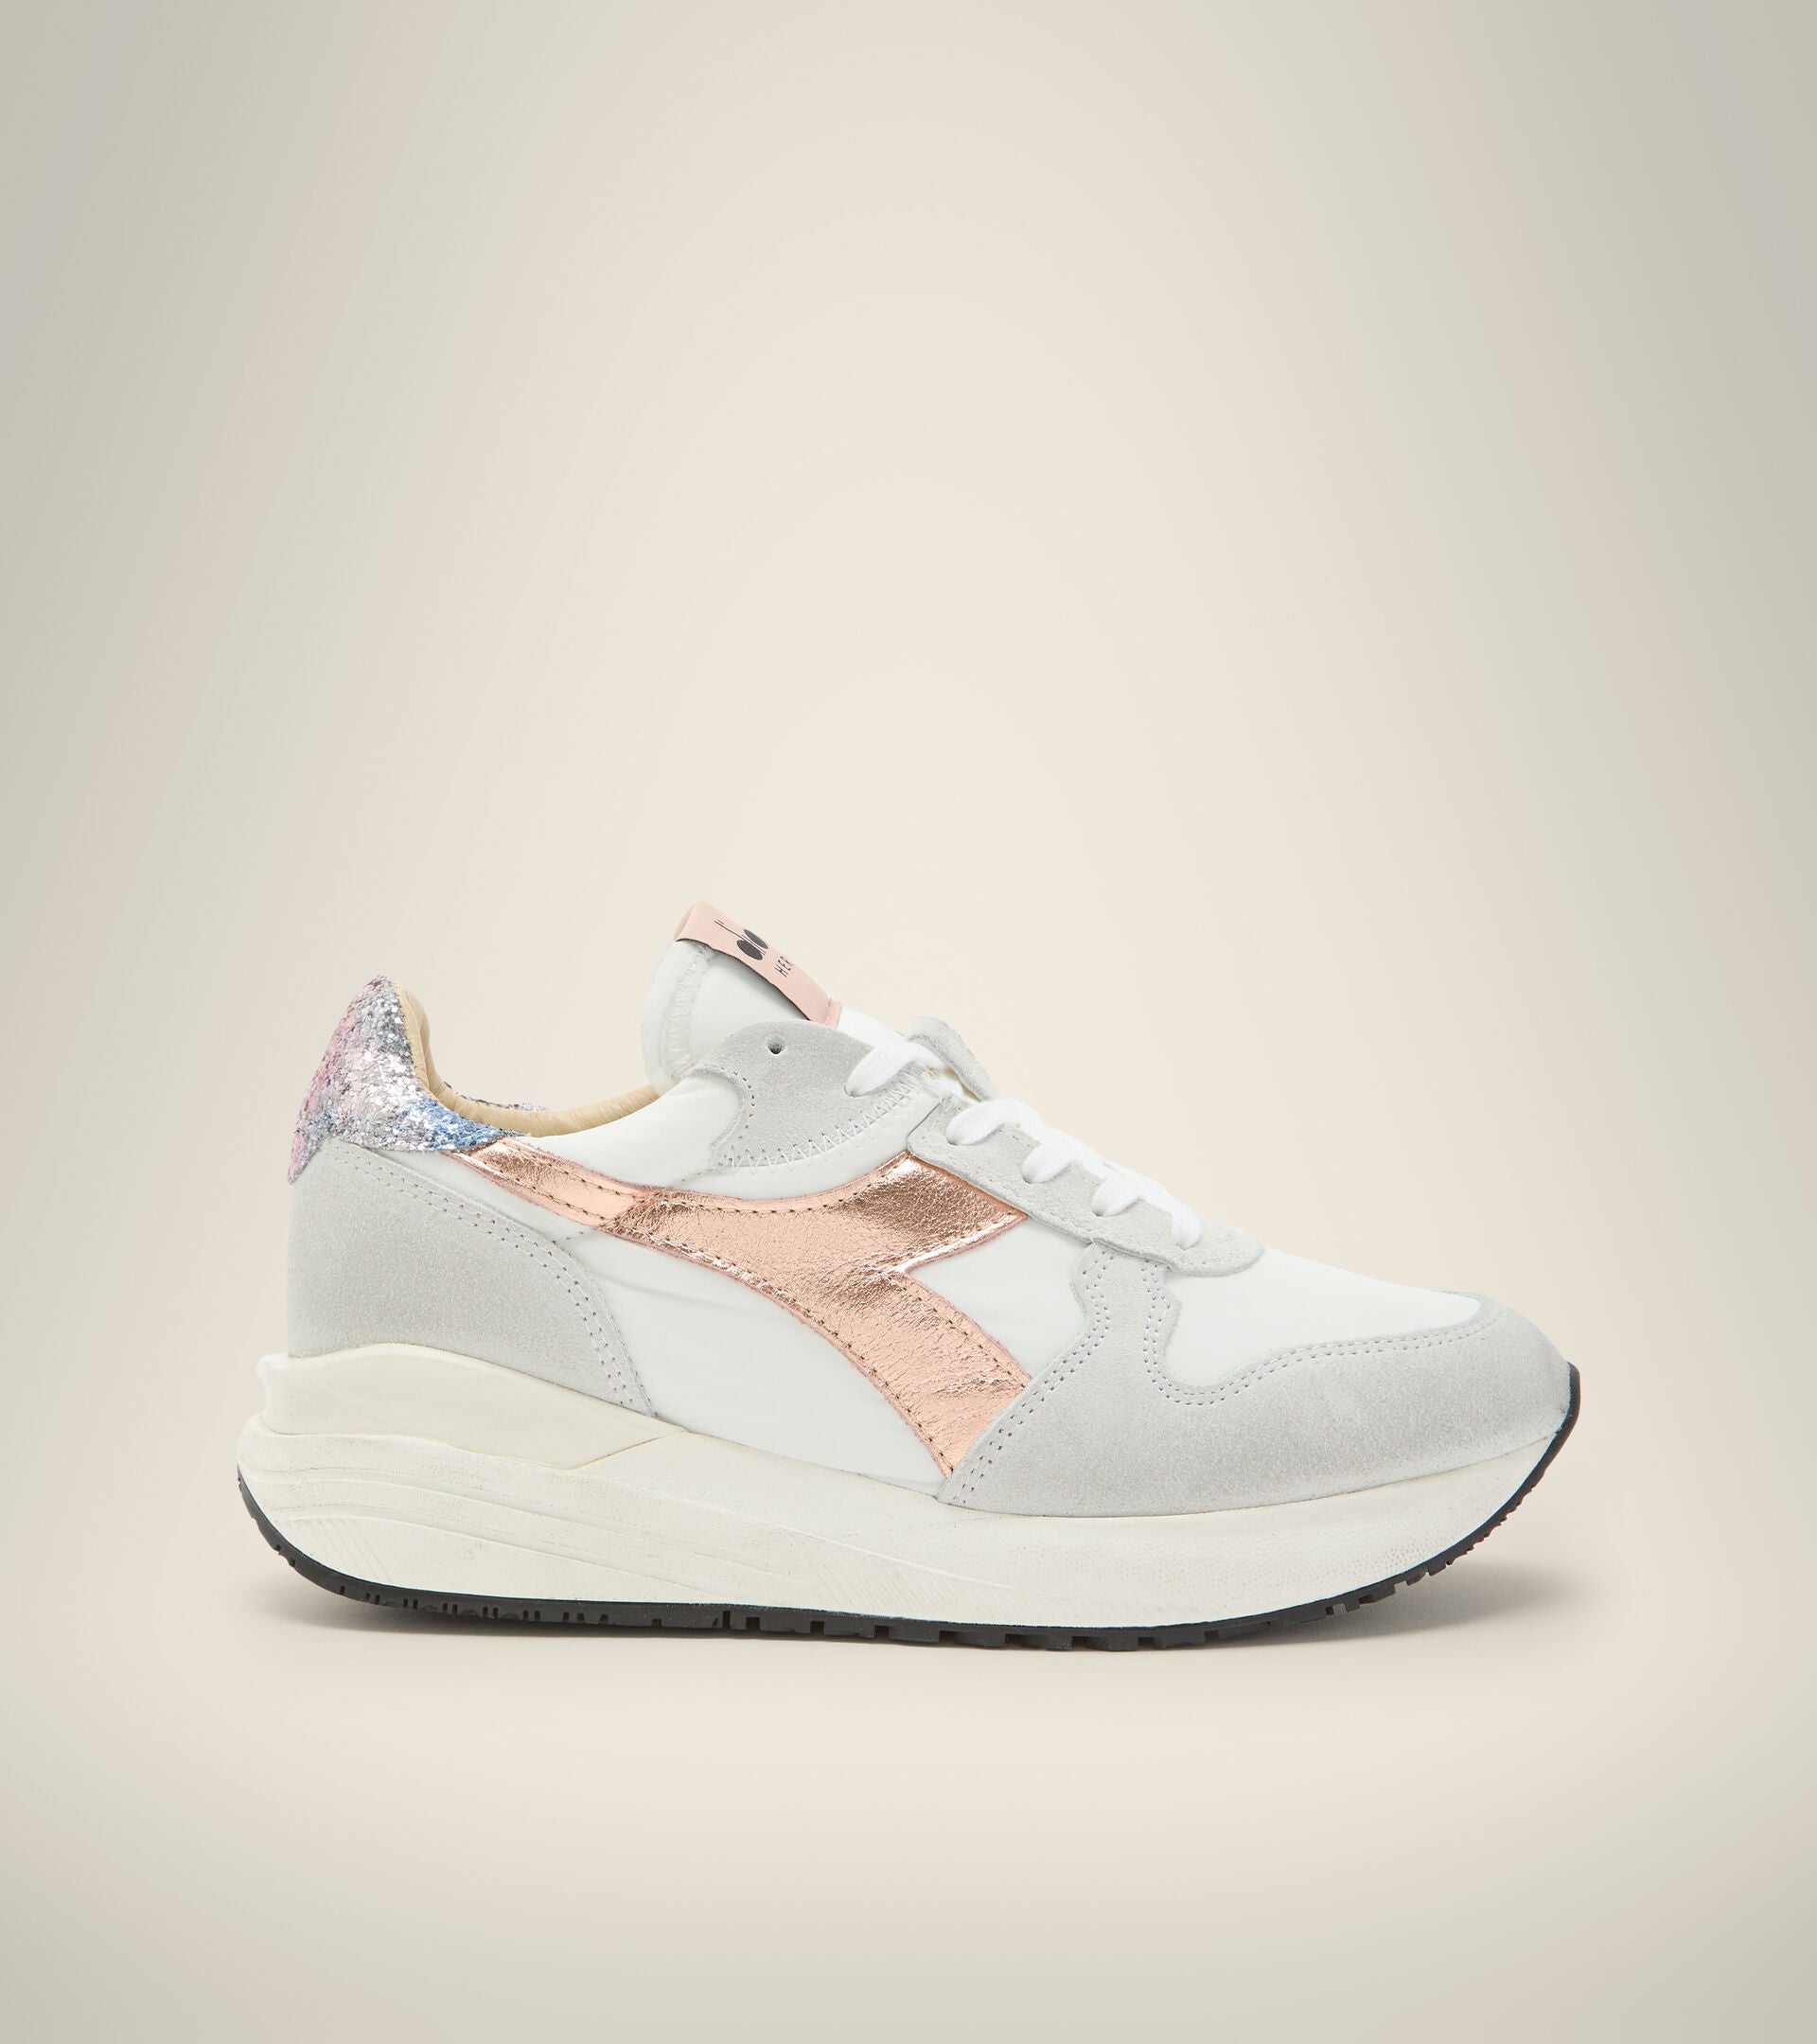 The finest materials and meticulous attention to detail make the women's Venus Iris Dirty a unique pair of trainers, designed to be worn during sports or for a casual drink.